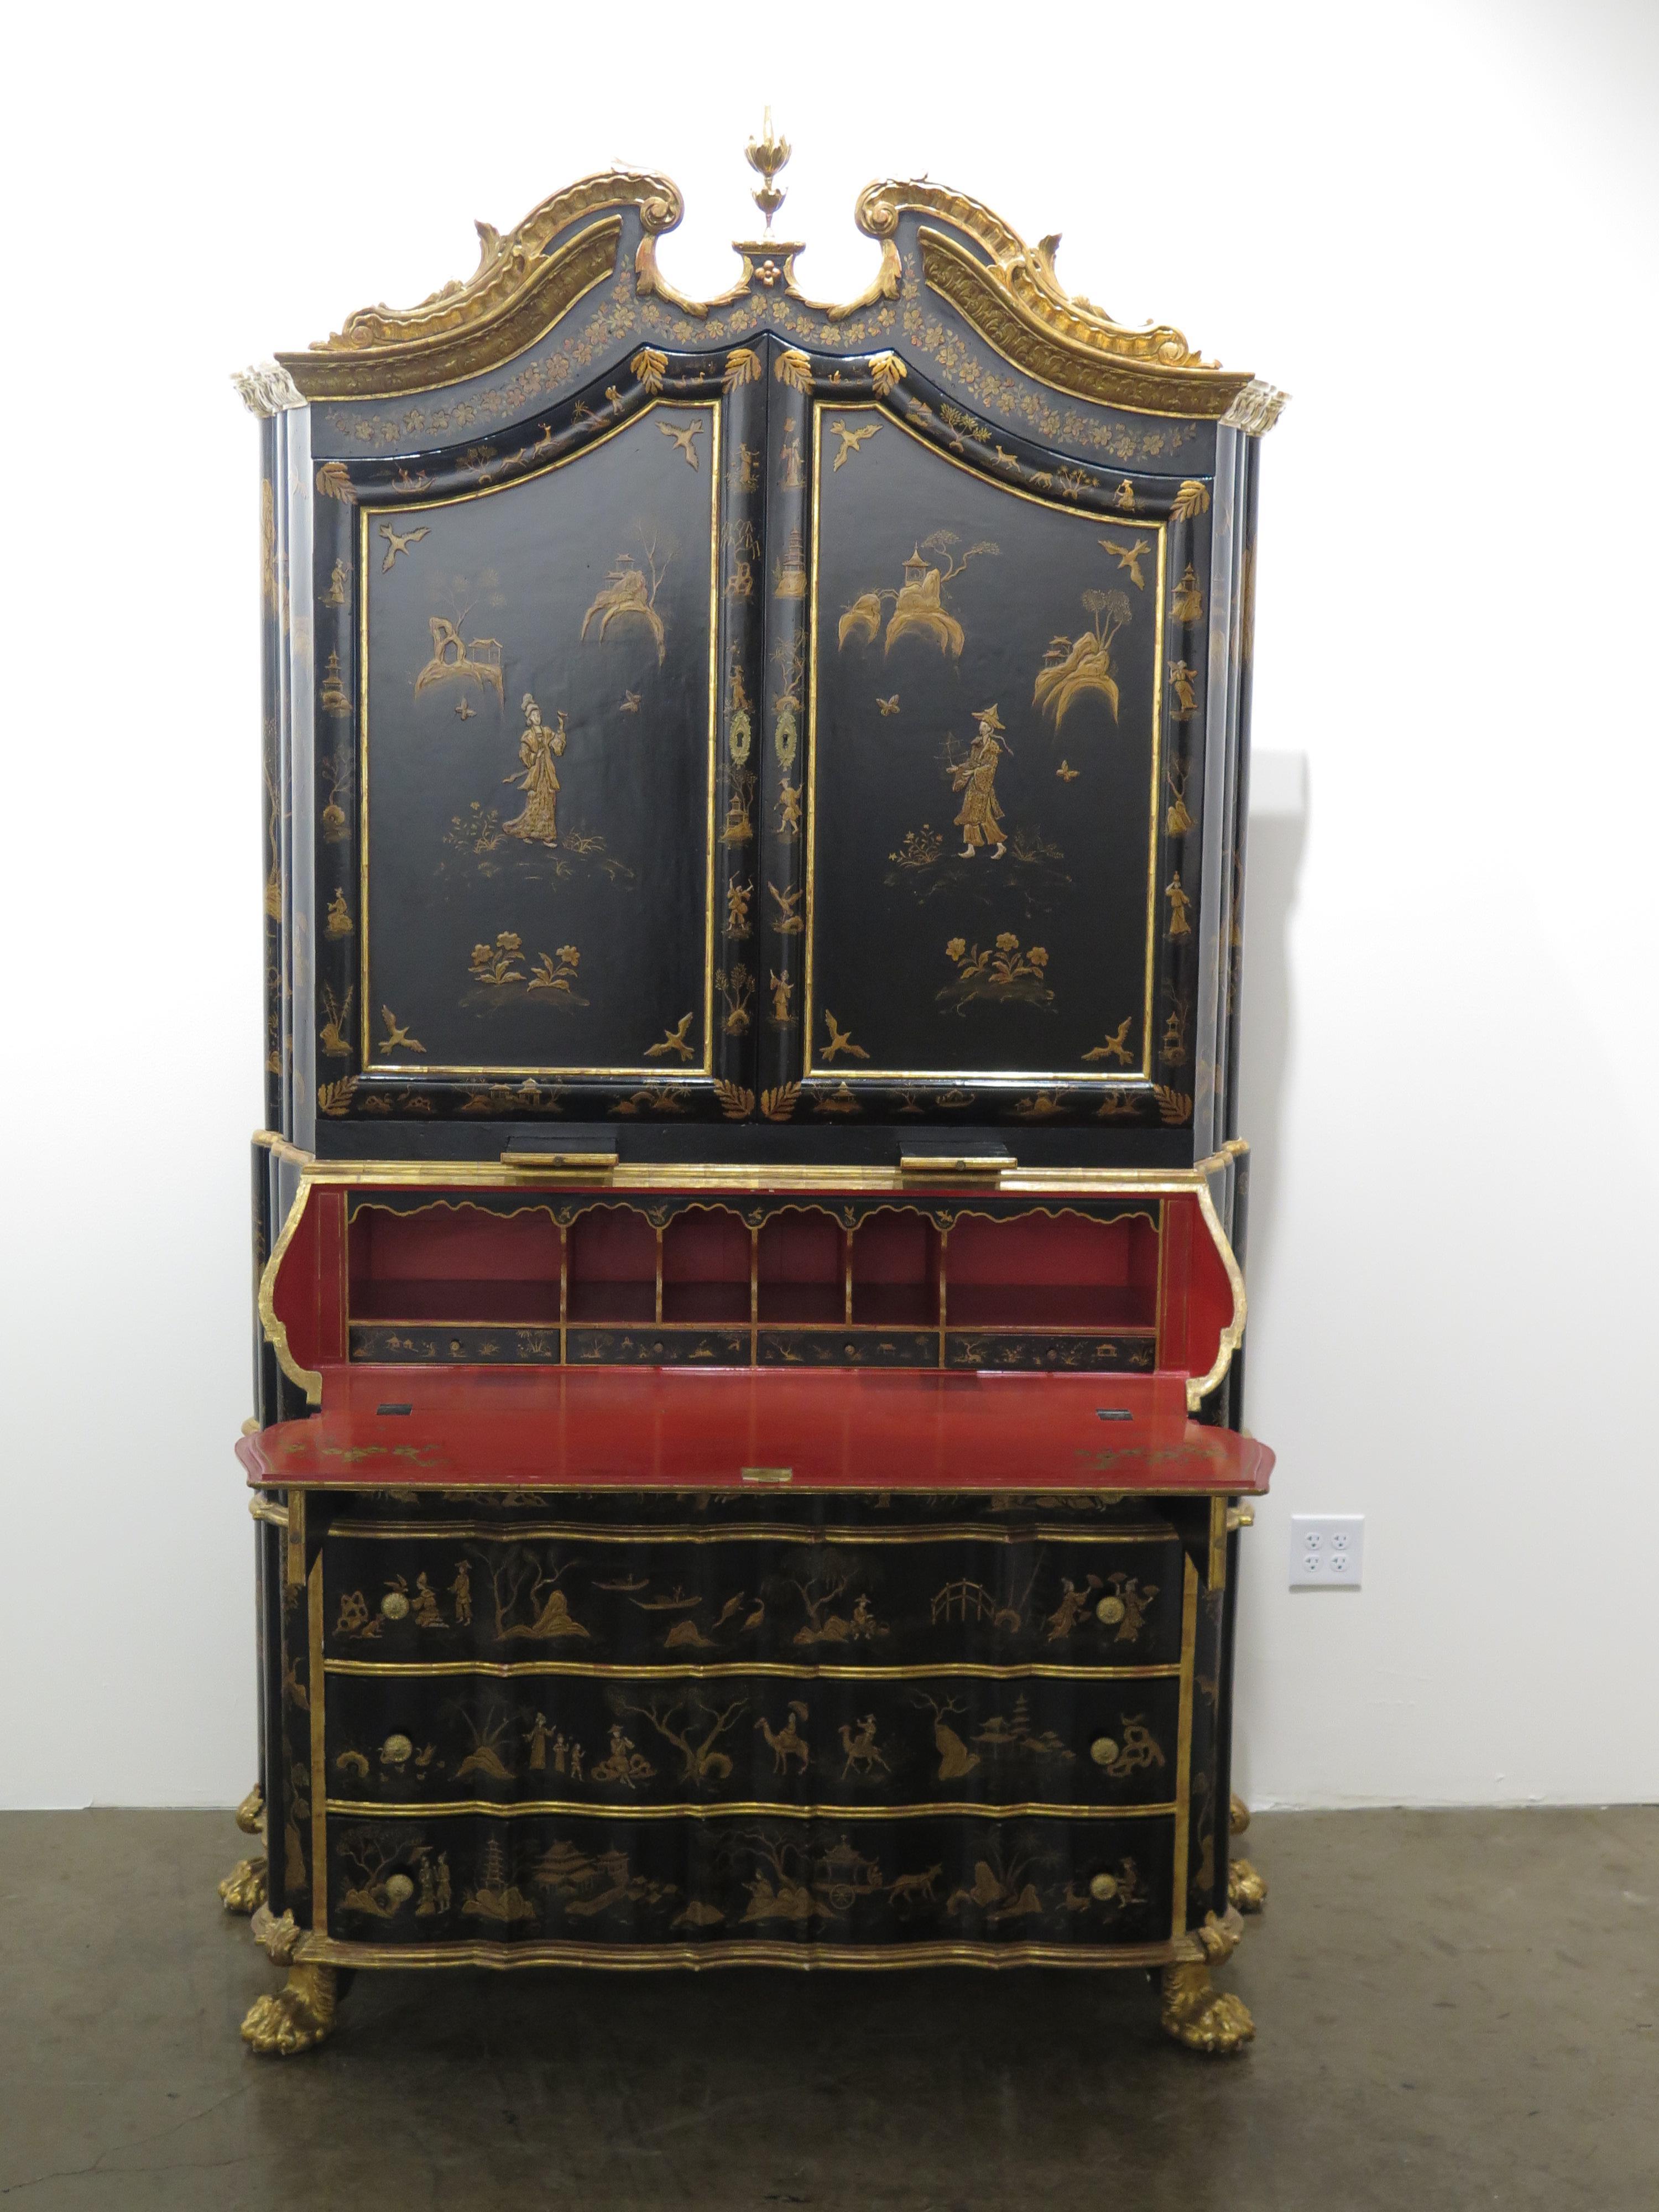 a George II-style black lacquer secretary / desk with Collector's Cabinet above, gilt Chinoiserie decoration overall, some raised, cabinet above fitted out with display shelves for Chinese porcelains (vases and figures) and finished in Chinese red